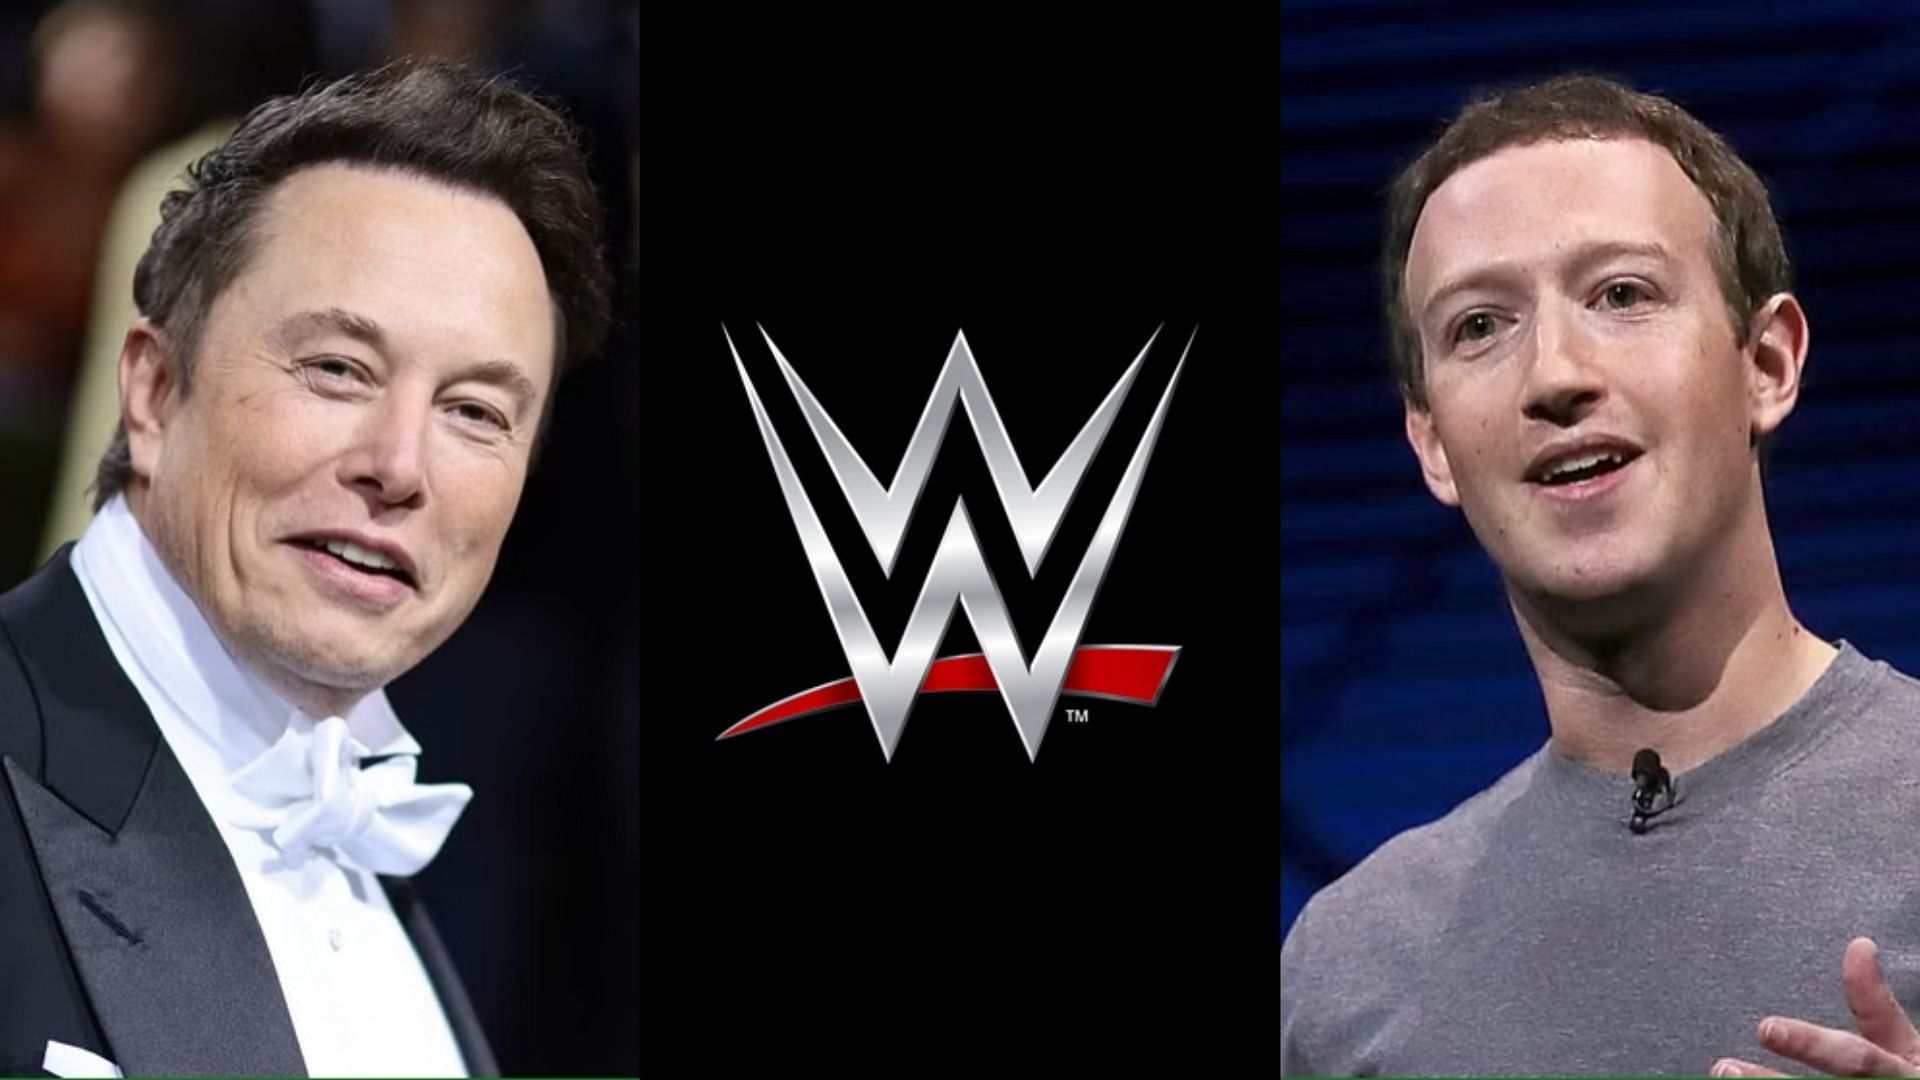 Elon Musk and Mark Zuckerberg are teasing a fight inside a UFC cage.